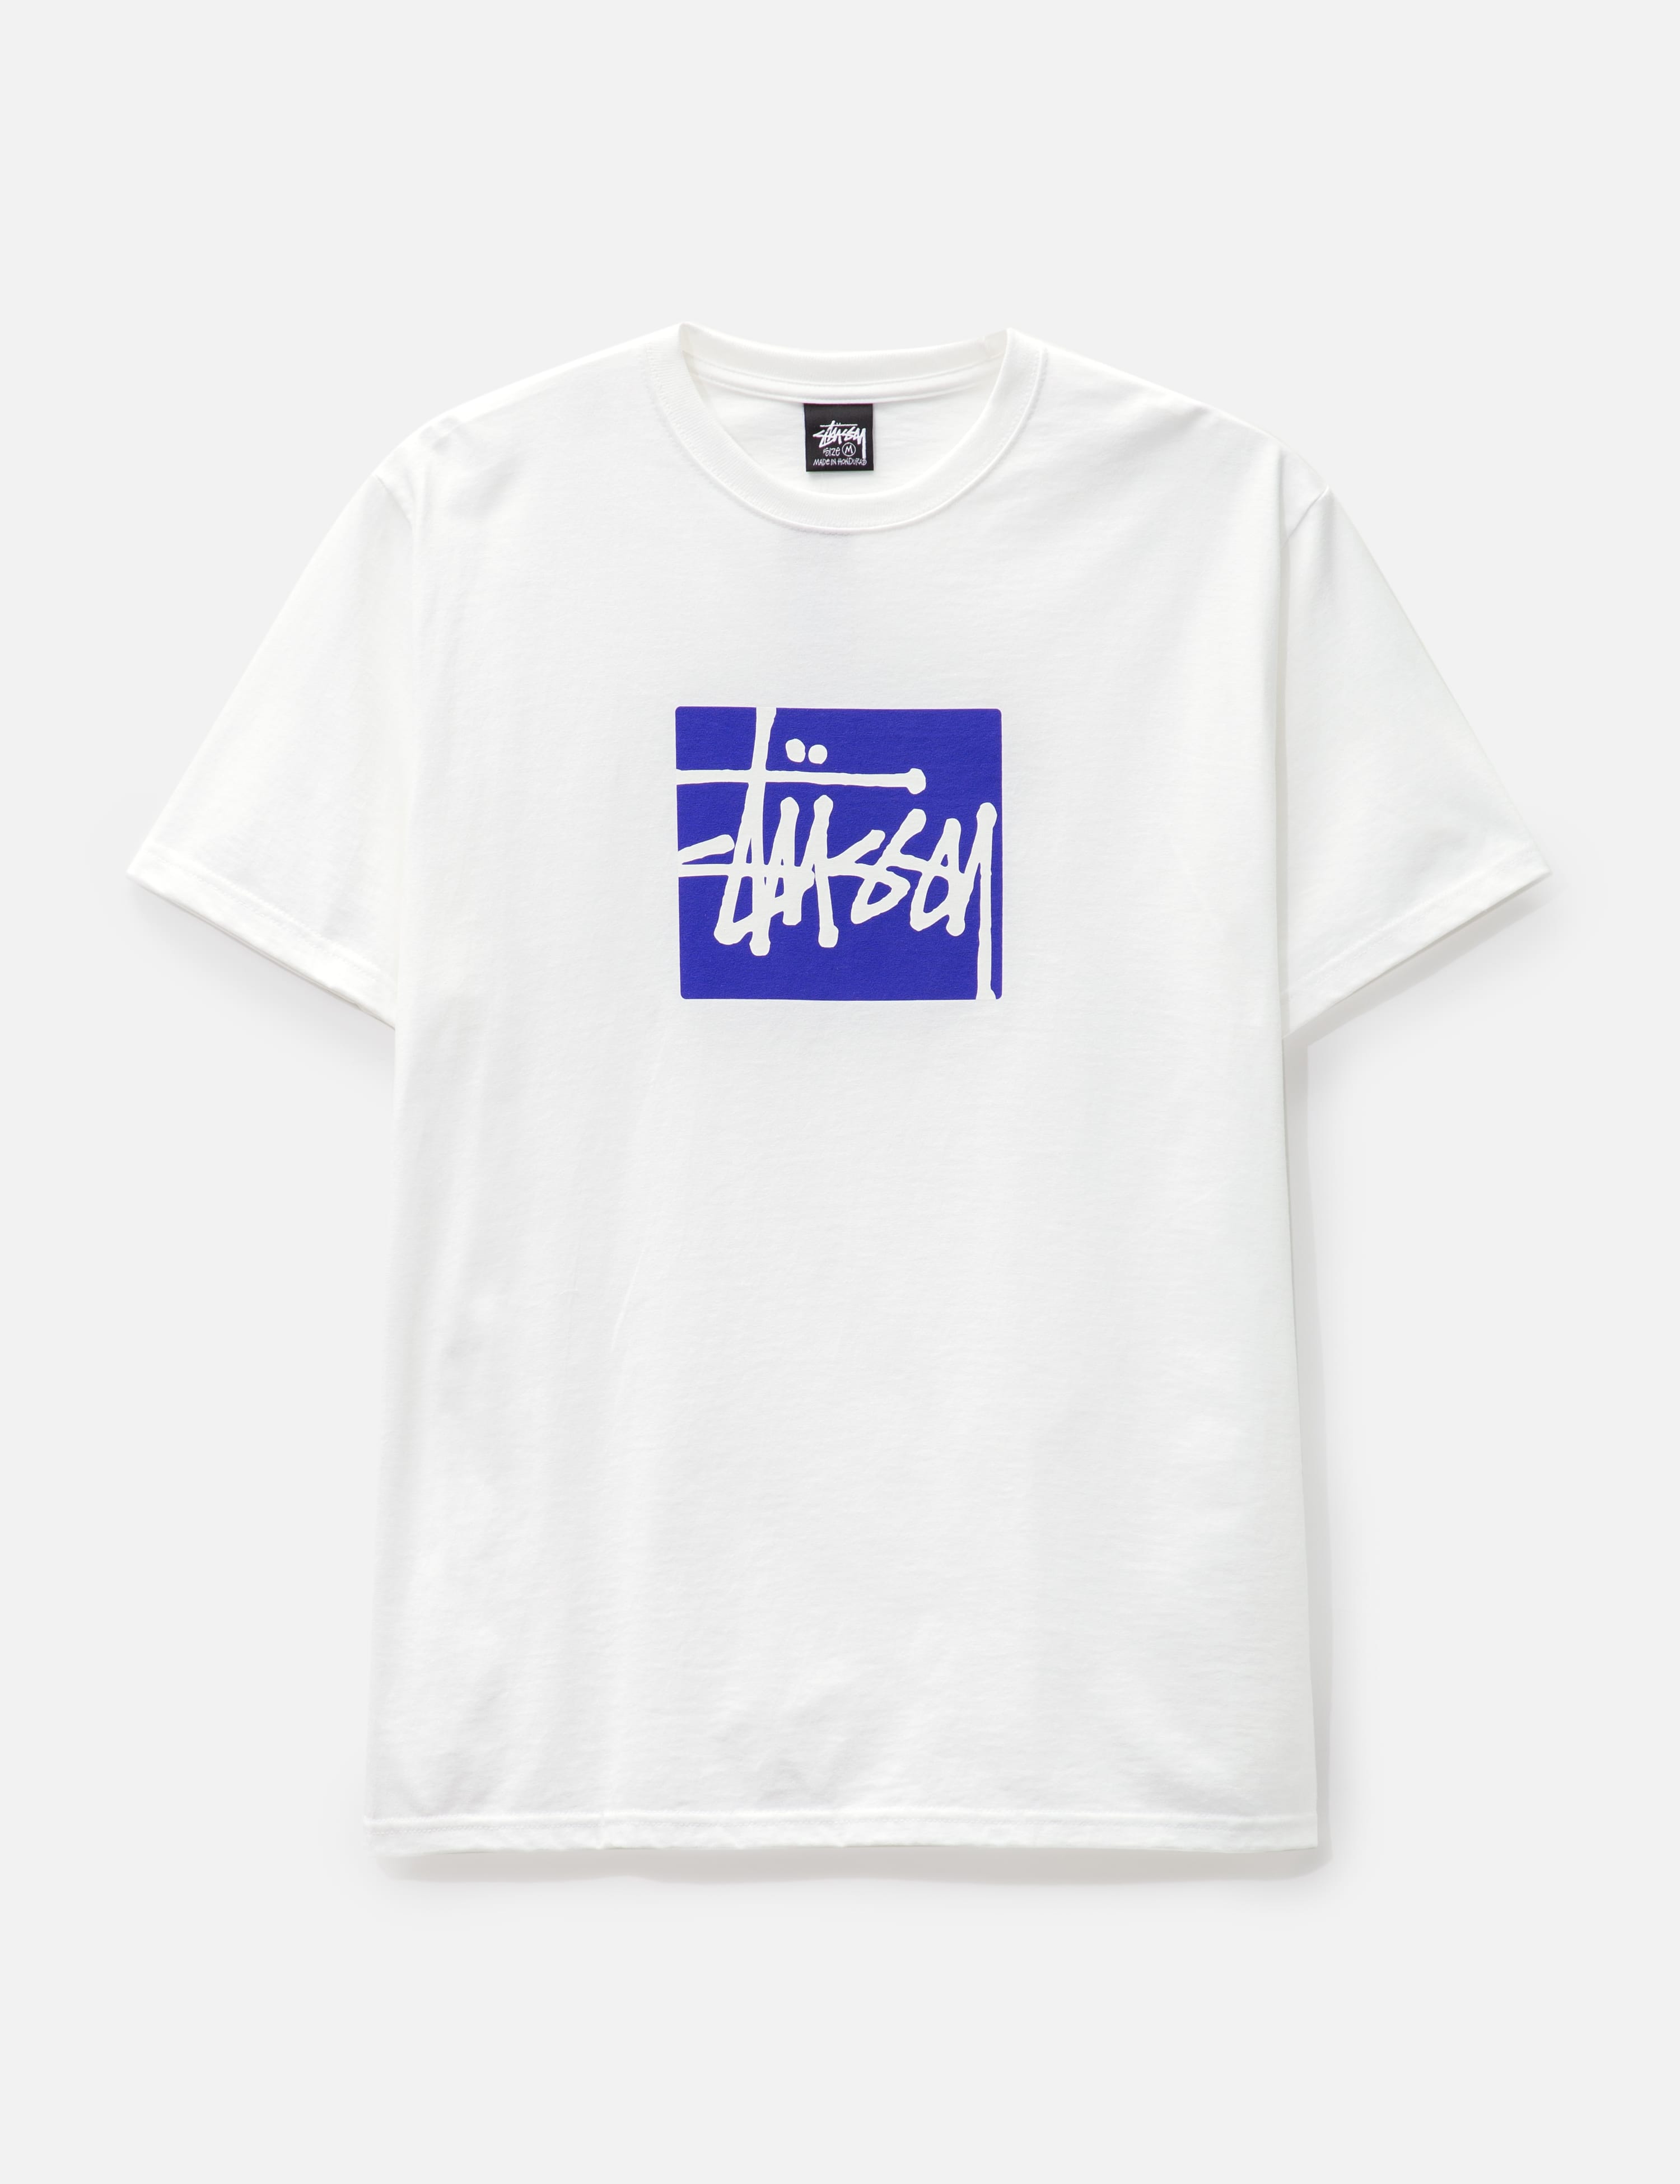 Stüssy - Stock Box T-shirt | HBX - Globally Curated Fashion and